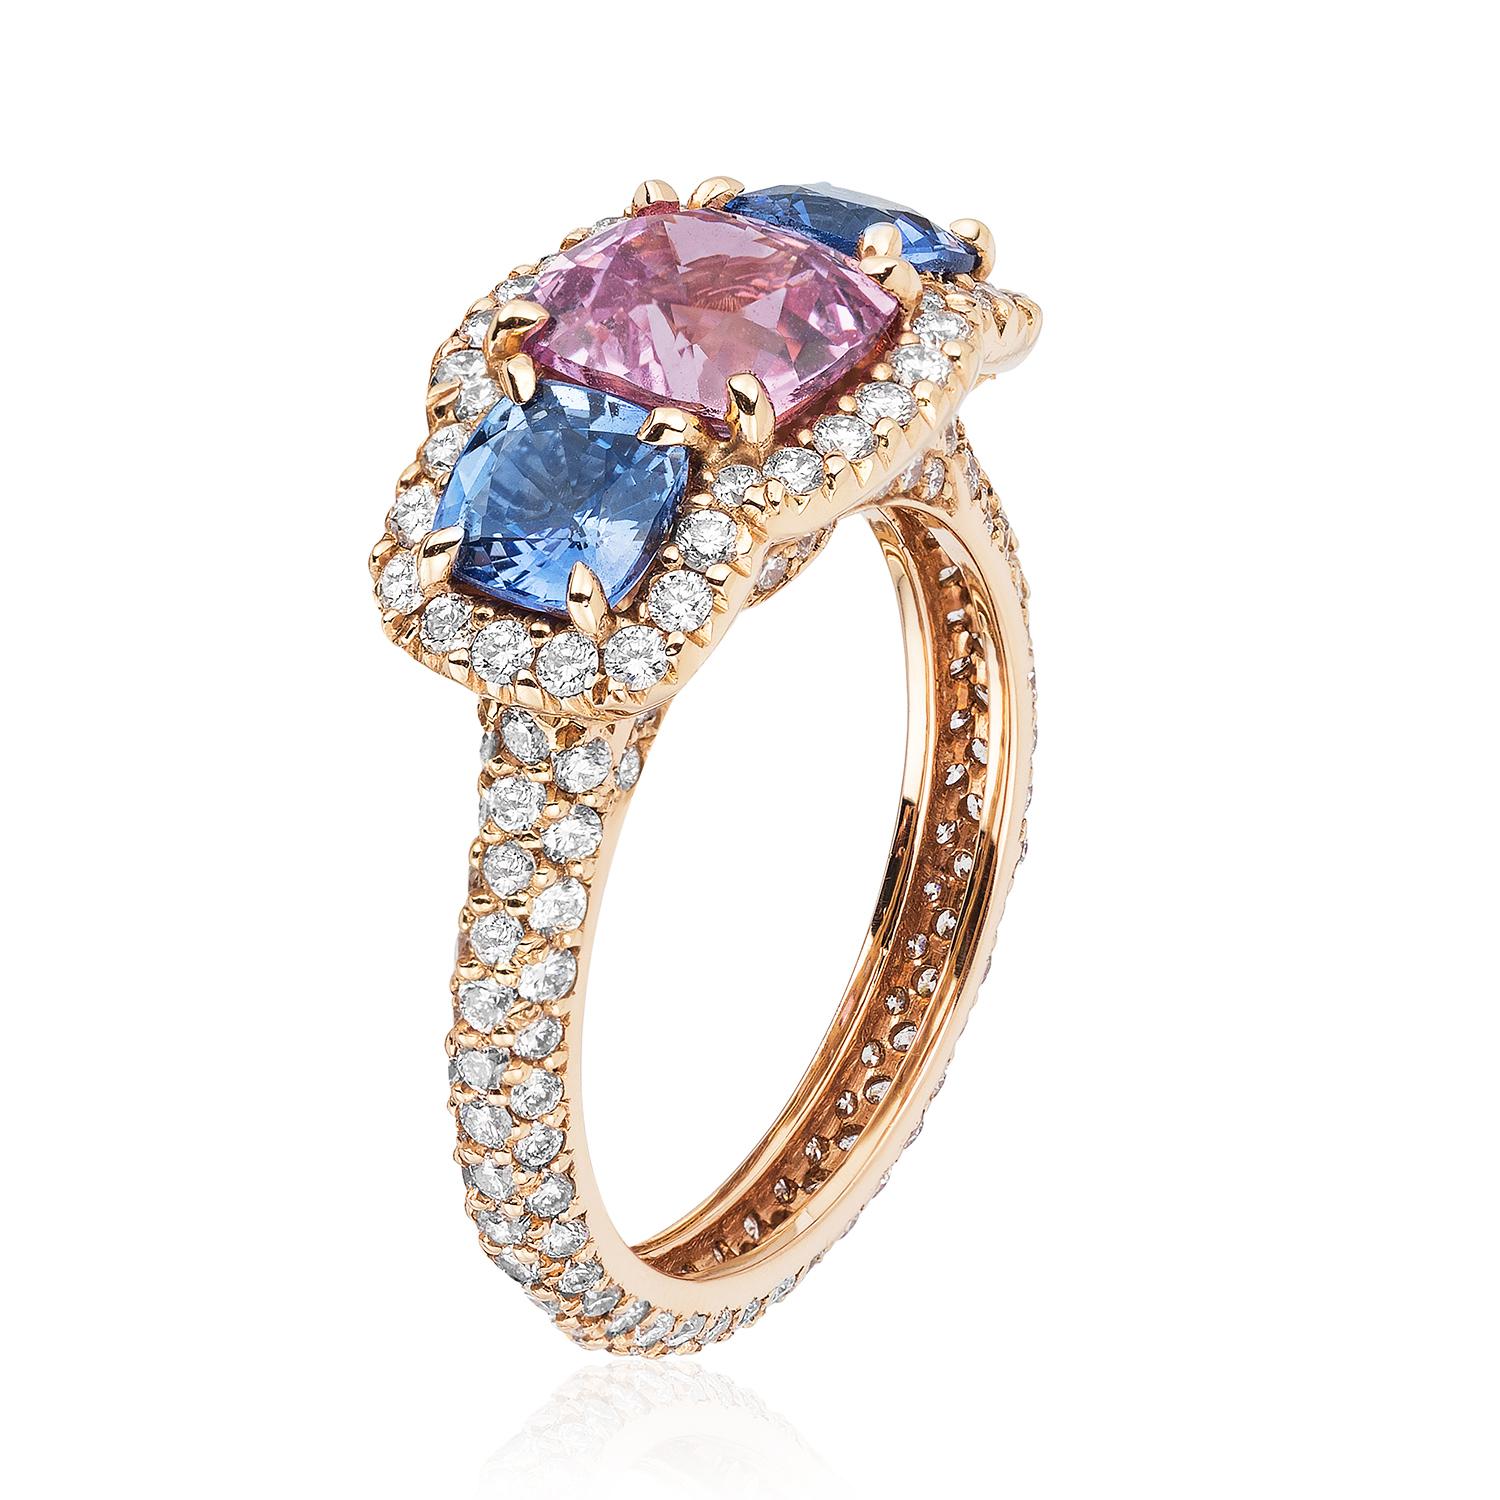 An 18kt rose-gold ring centered upon a 2.07 carat cushion pink sapphire flanked by two cushion blue sapphires weighing 1.44 carats total, certified by C. Dunaigre Consulting, set within a colorless diamond micropavé surround and colorless diamond